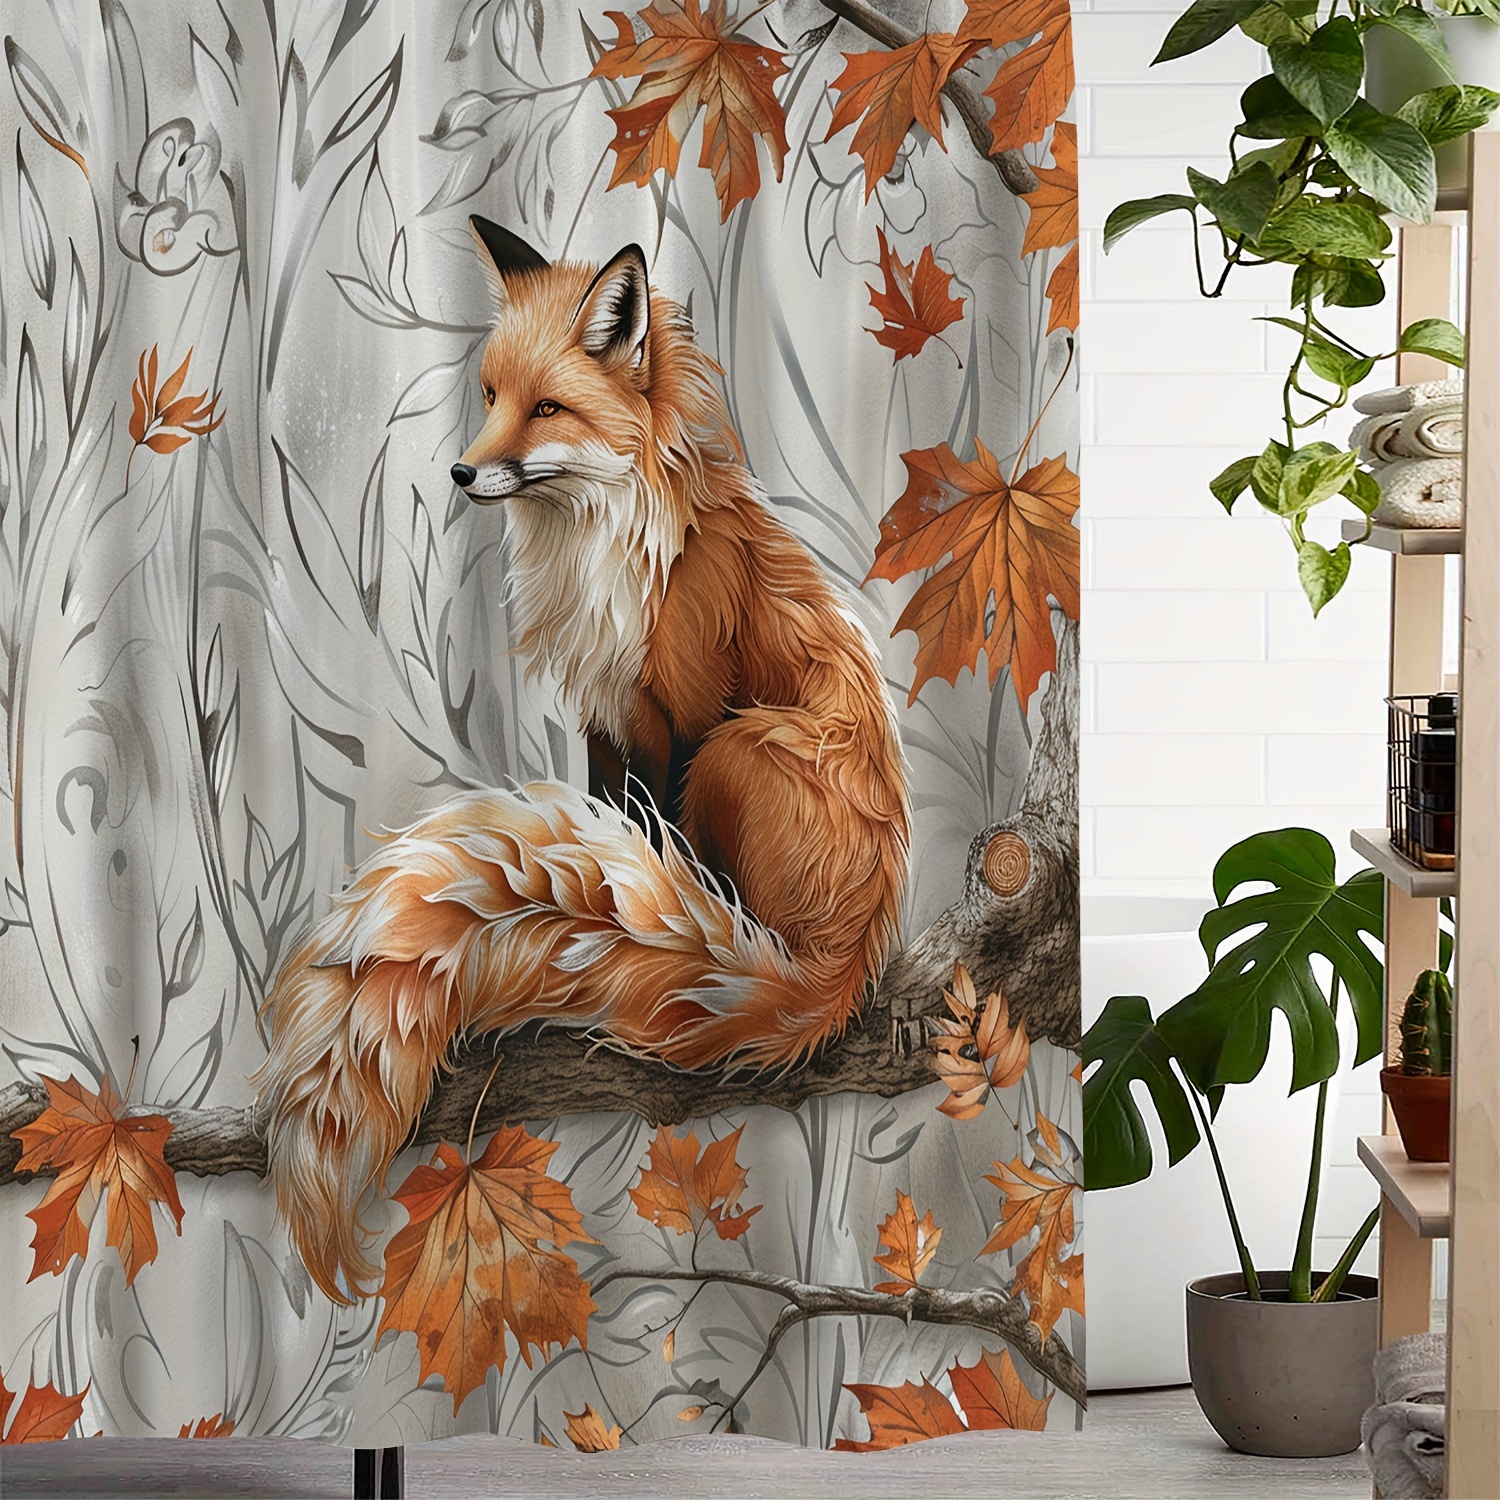 

Maple Leaf Print Shower Curtain, Arts-inspired Water-resistant Polyester Bath Curtain With 12 Hooks – Machine Washable, Woven Fabric With Nature Theme, Includes Water-repellent Feature